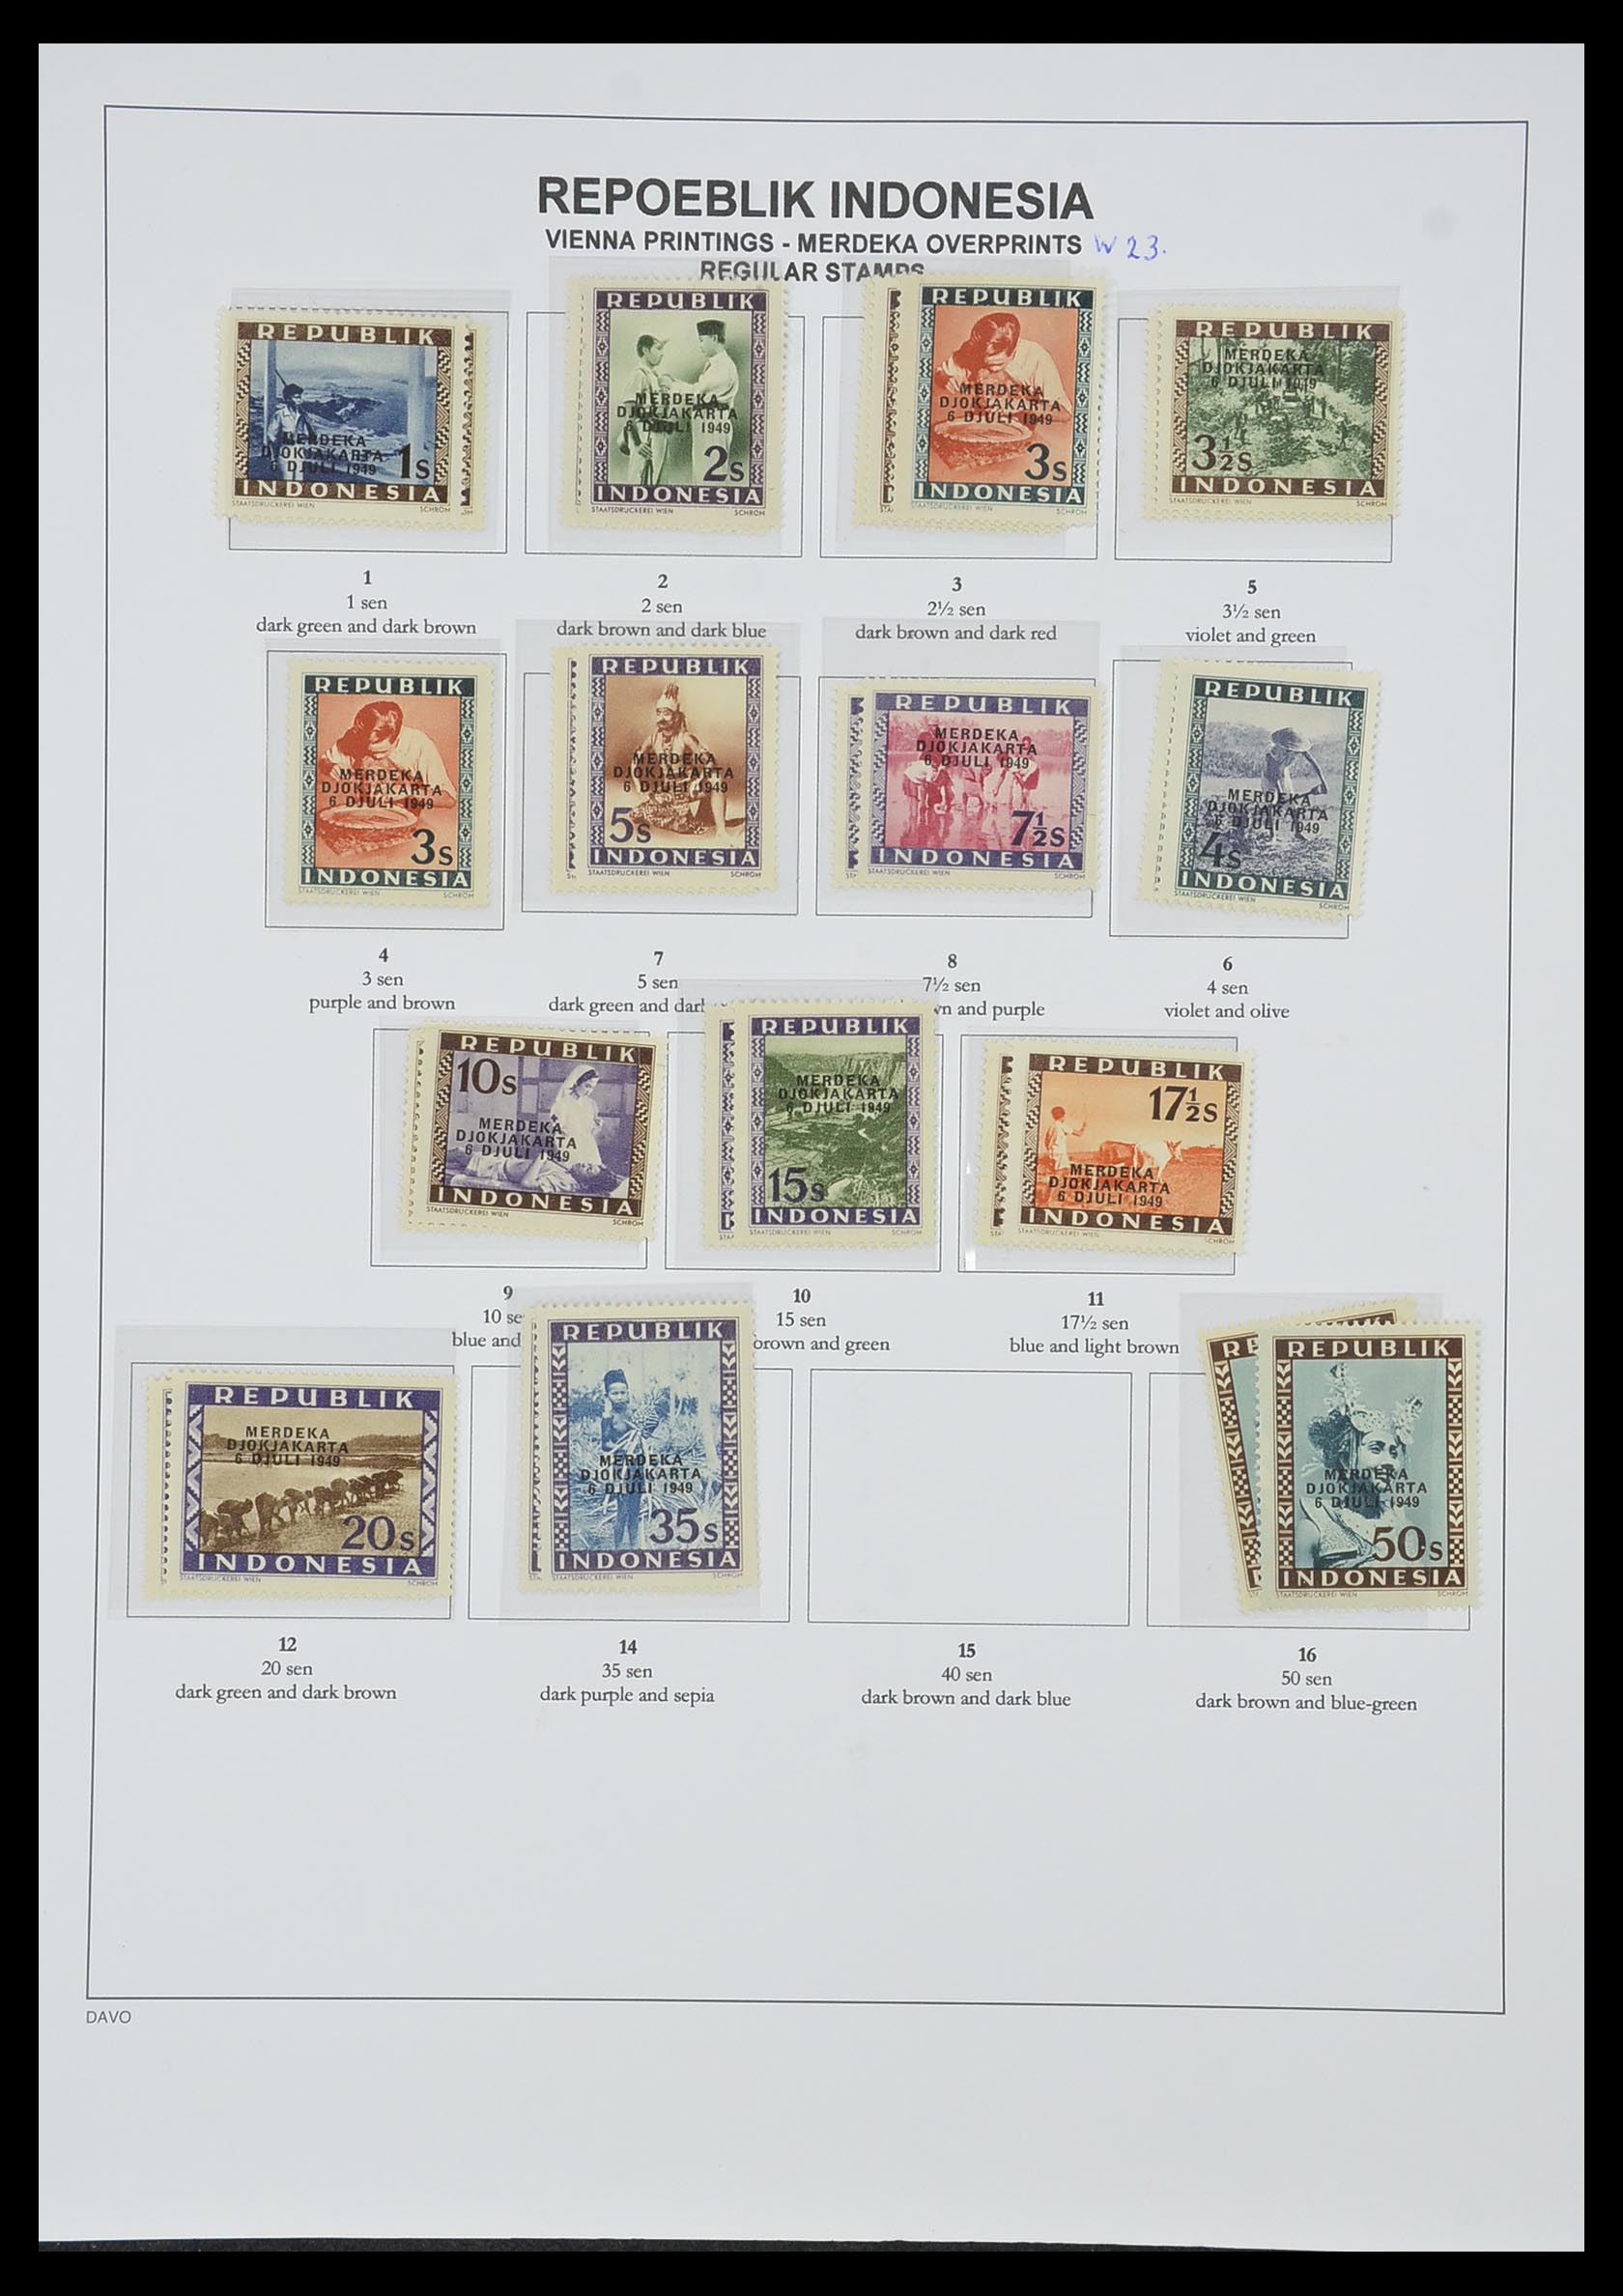 33988 037 - Stamp collection 33988 Vienna printings Indonesia.